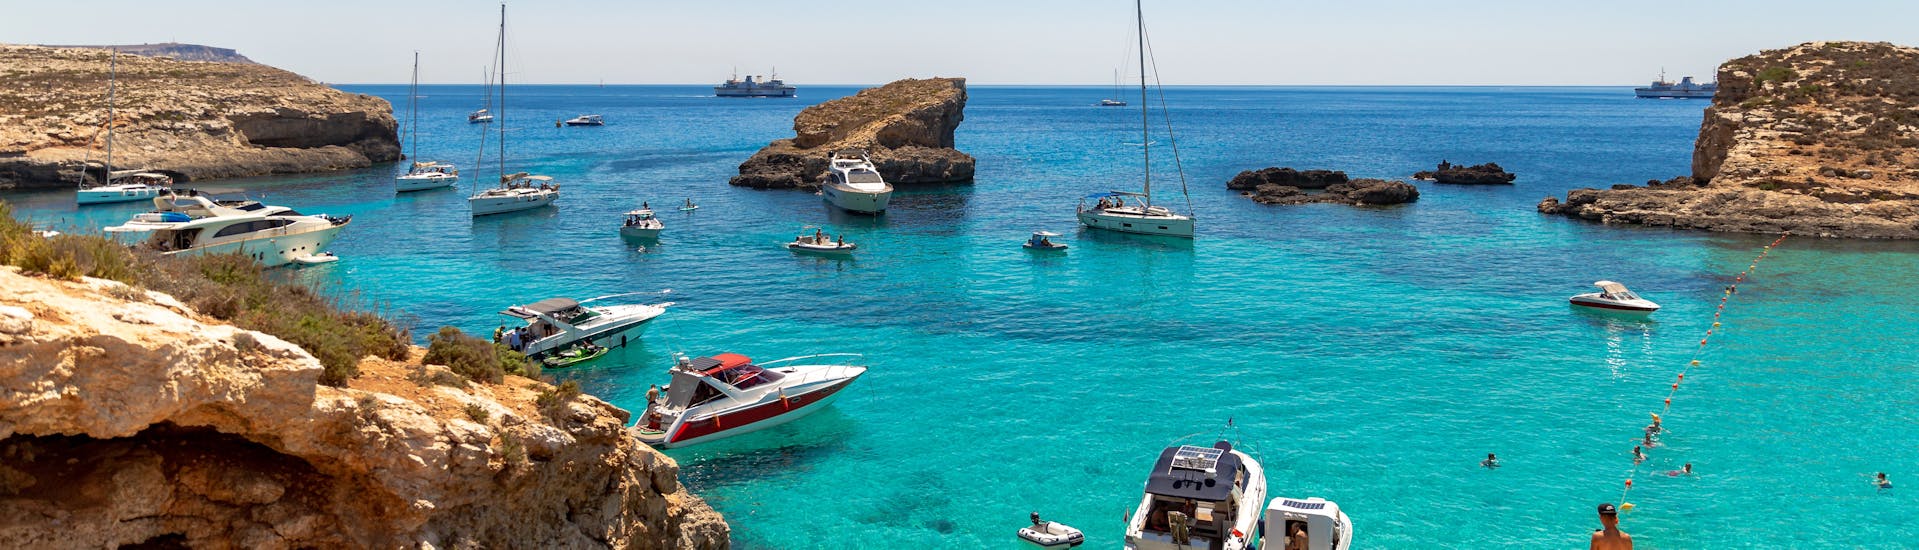 A lot of boats are docked near the coast during the Boat Trip to Comino incl. Blue Lagoon, Caves & St. Paul's Island mit Mermaid Cruises Malta.